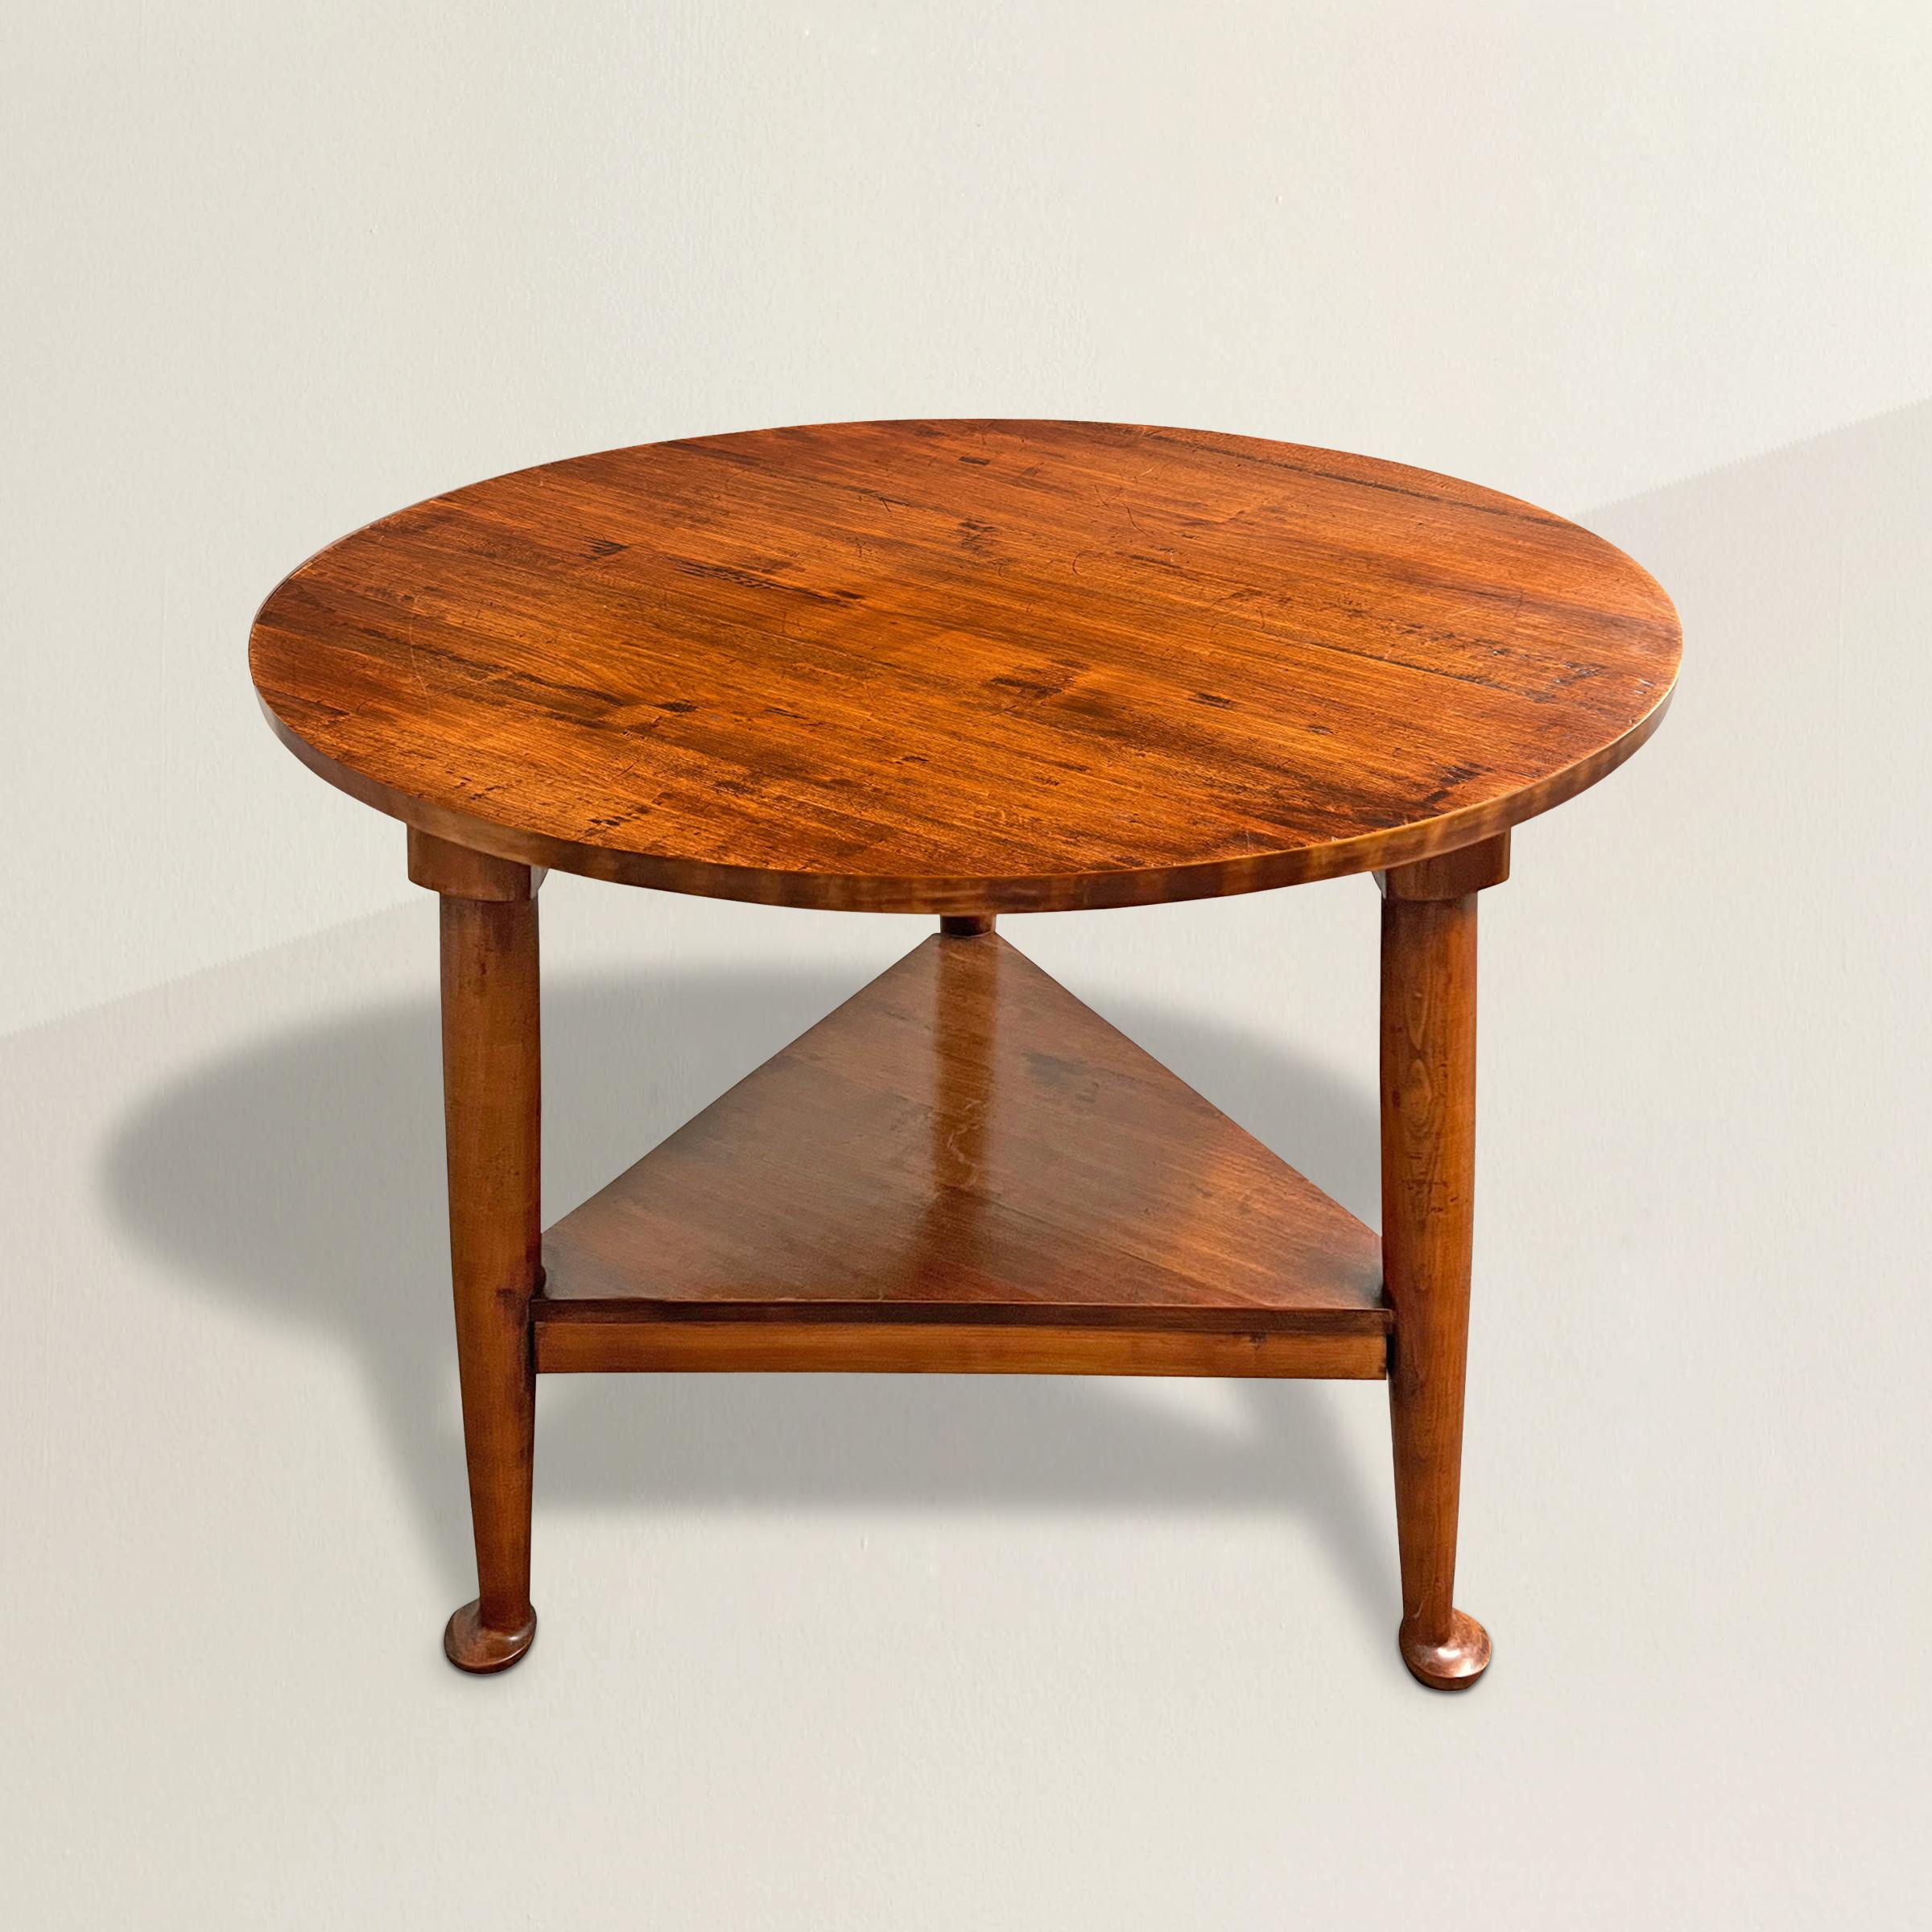 This 20th-century cricket table is a testament to the enduring charm and practicality of this classic design. Featuring a round top, this table's three gracefully tapered legs are not only aesthetically pleasing but also serve a crucial purpose. In